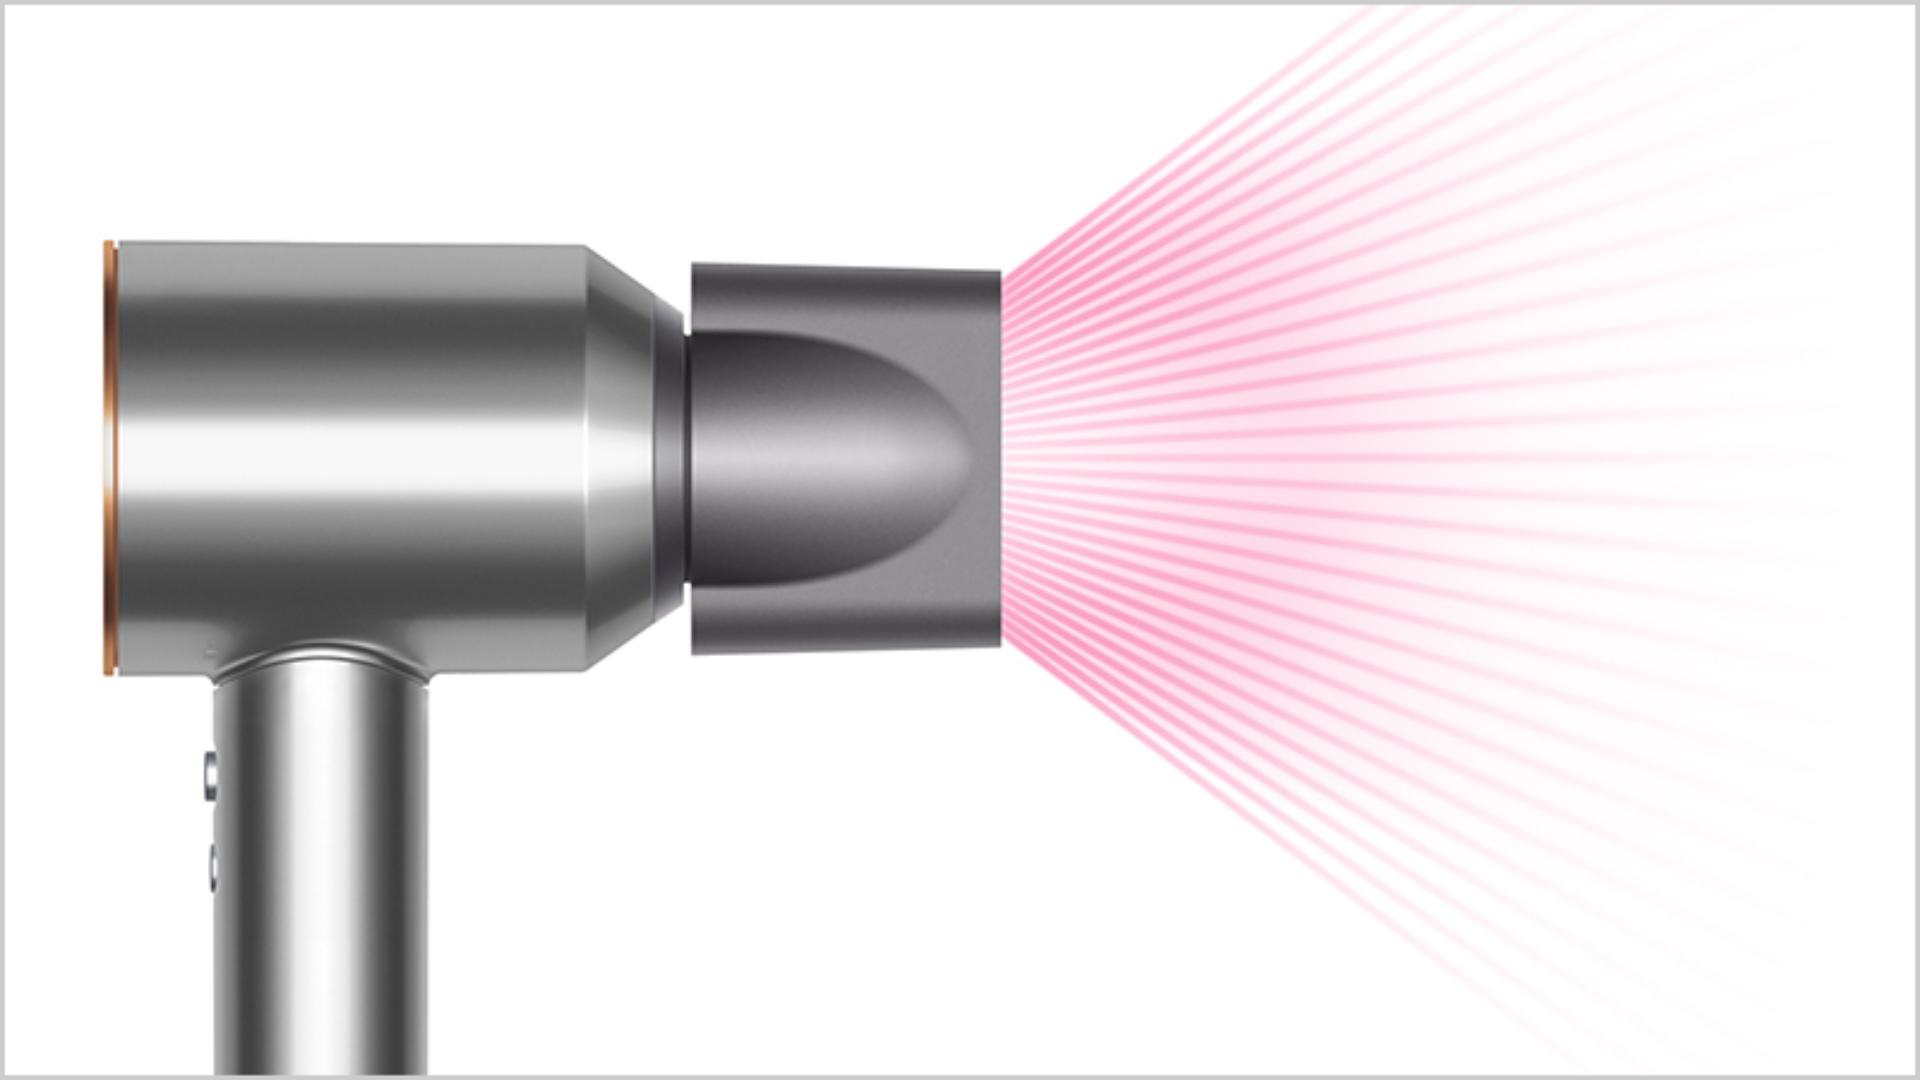 Side view of the Dyson Supersonic with Smoothing nozzle attachment.